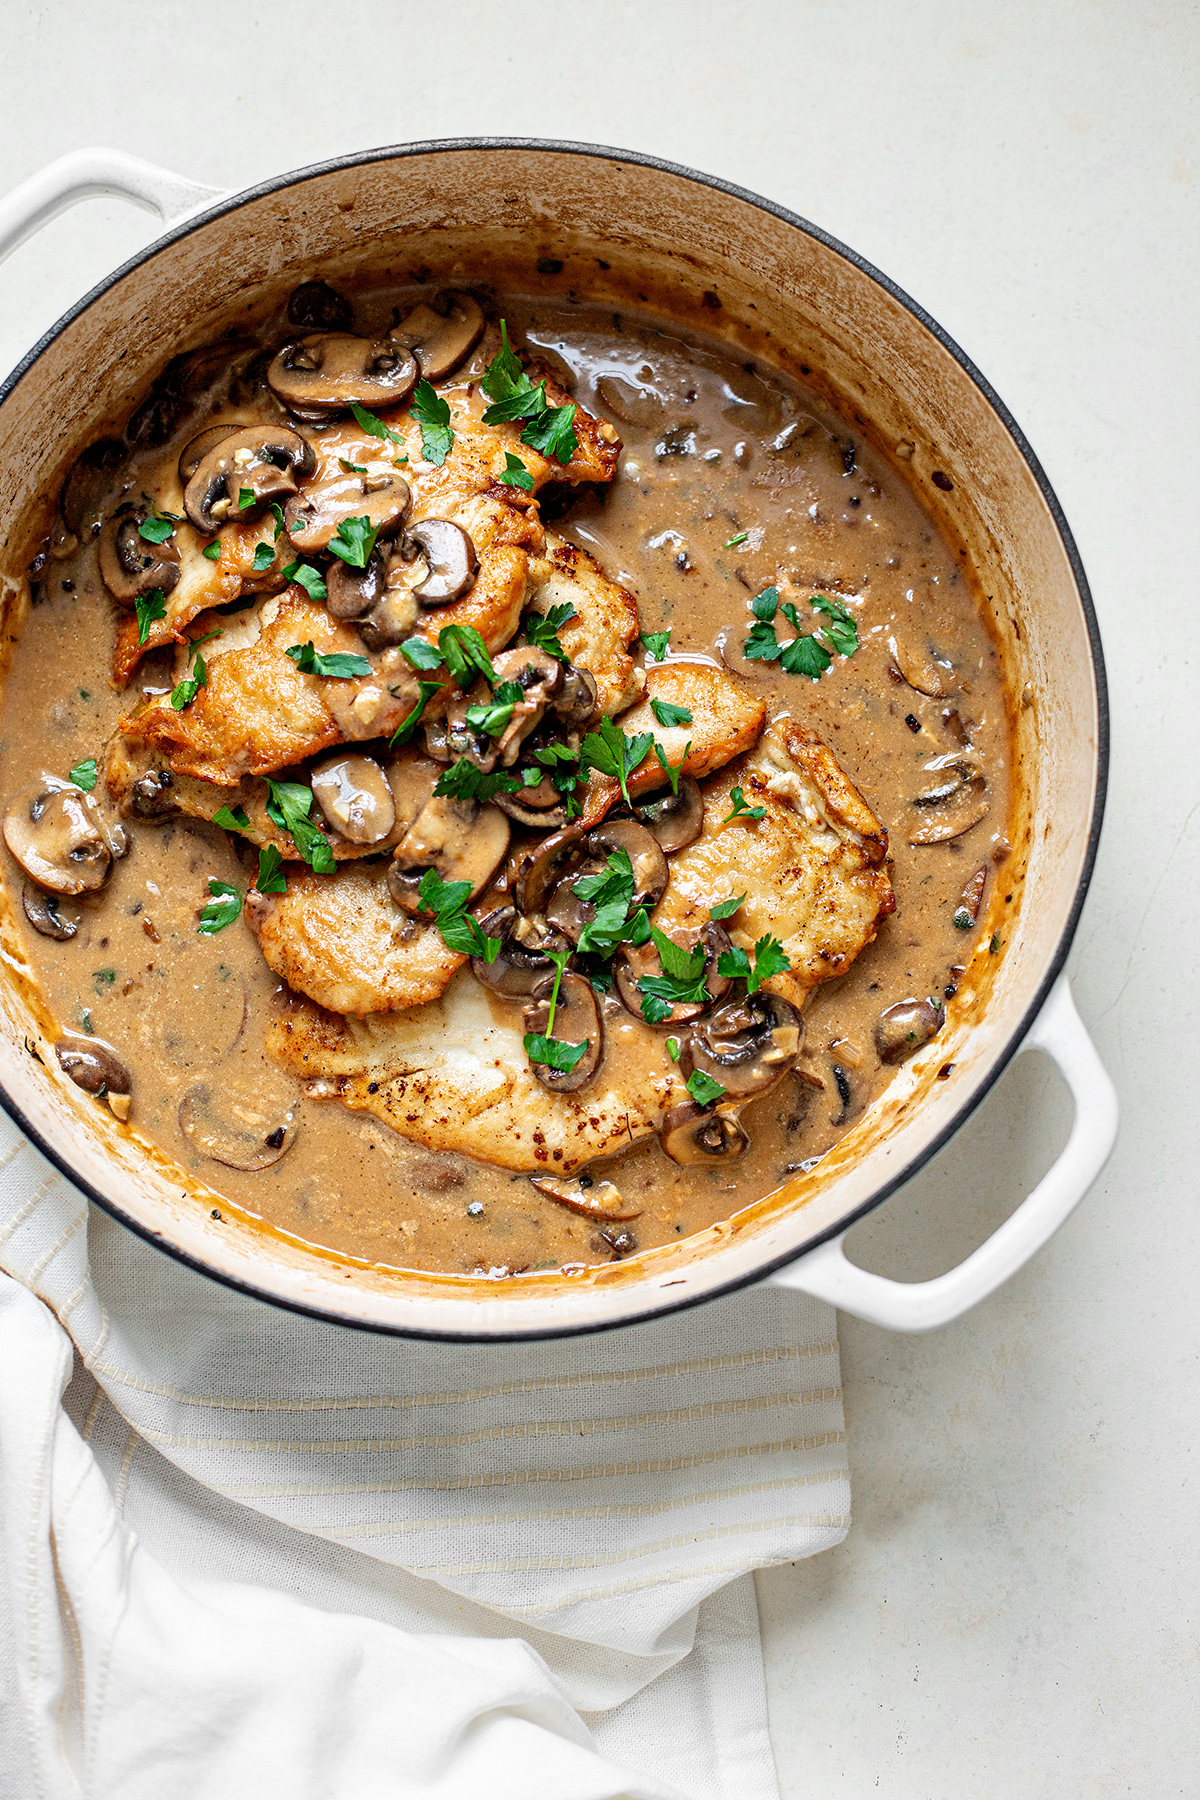 How-to-Make-the-Best-Chicken-Marsala-Recipe | Good Life Eats